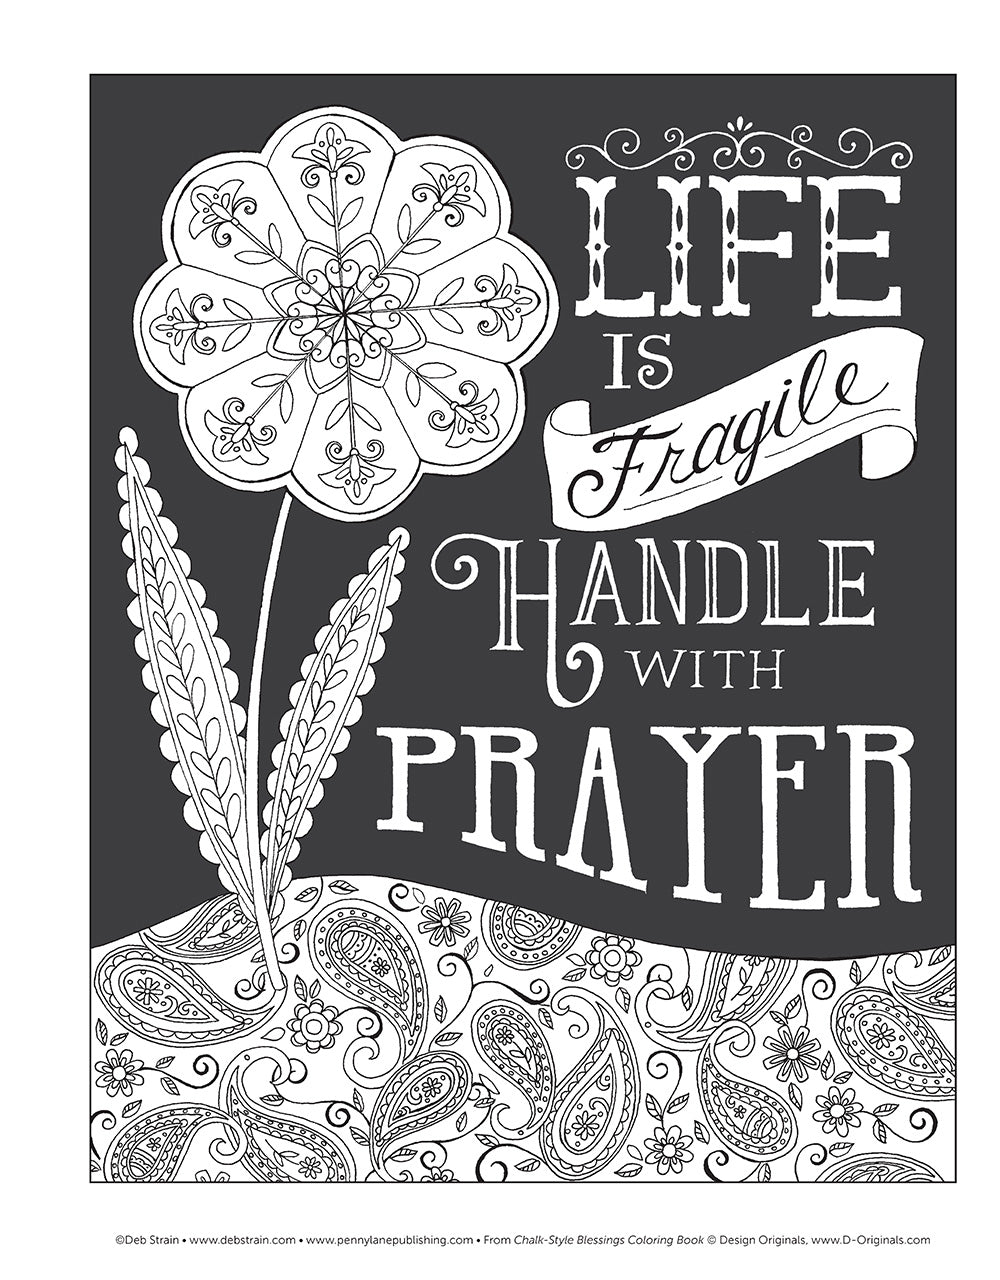 Chalk-Style Blessings Coloring Book